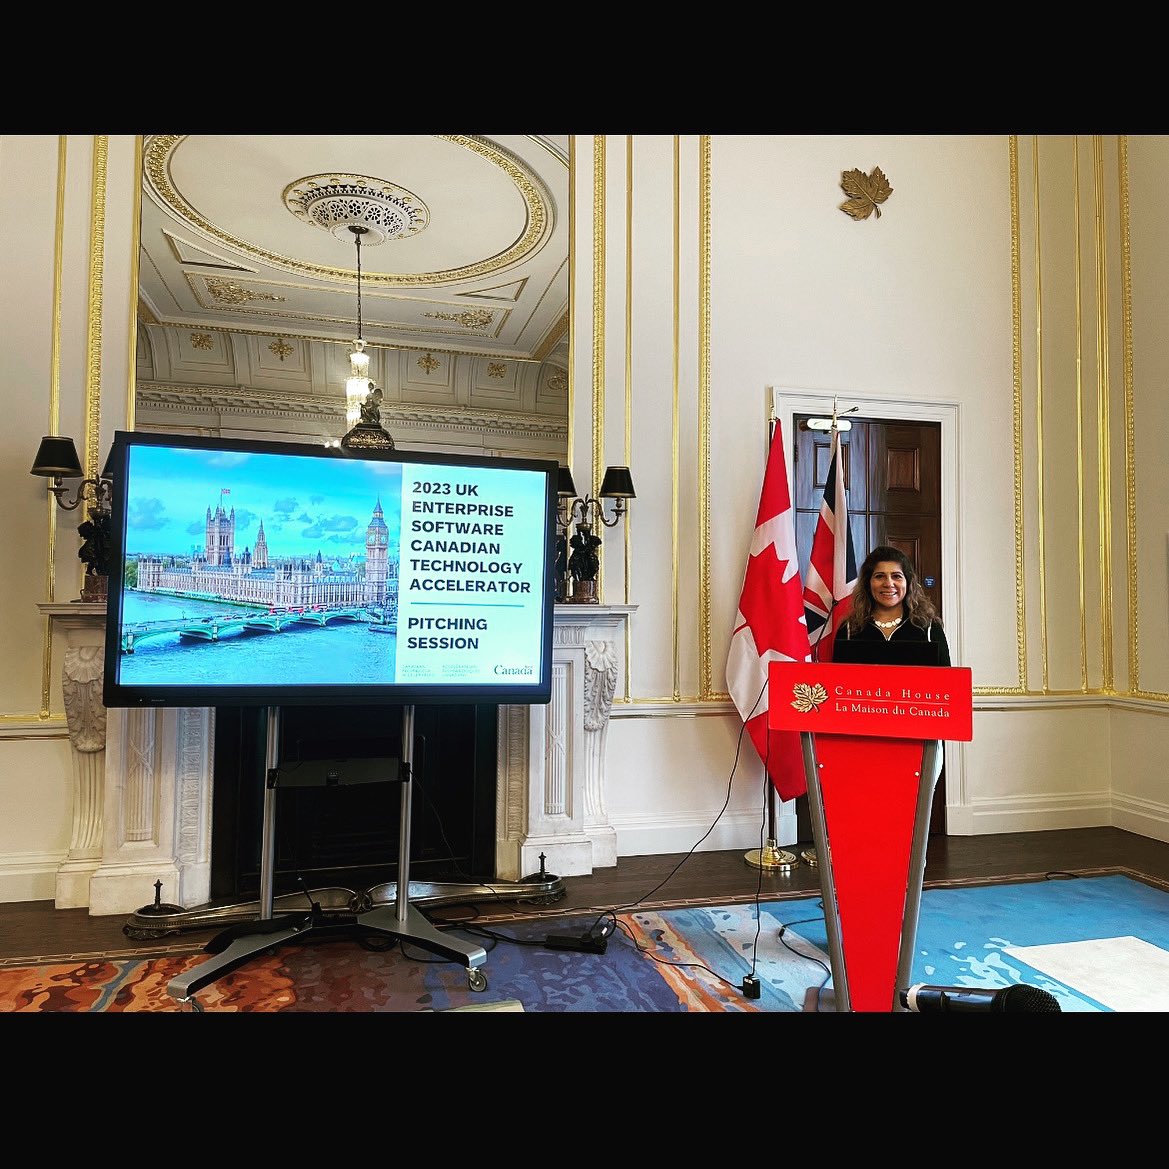 Always such a joy to be at Canada House in London. Here to judge at the Canadian Technology Accelerator Pitch Session. Just love giving back to the country that raised me 🇨🇦 💖#cta #canadiantechnologyaccelerator #Canadahouse #beingCanadian